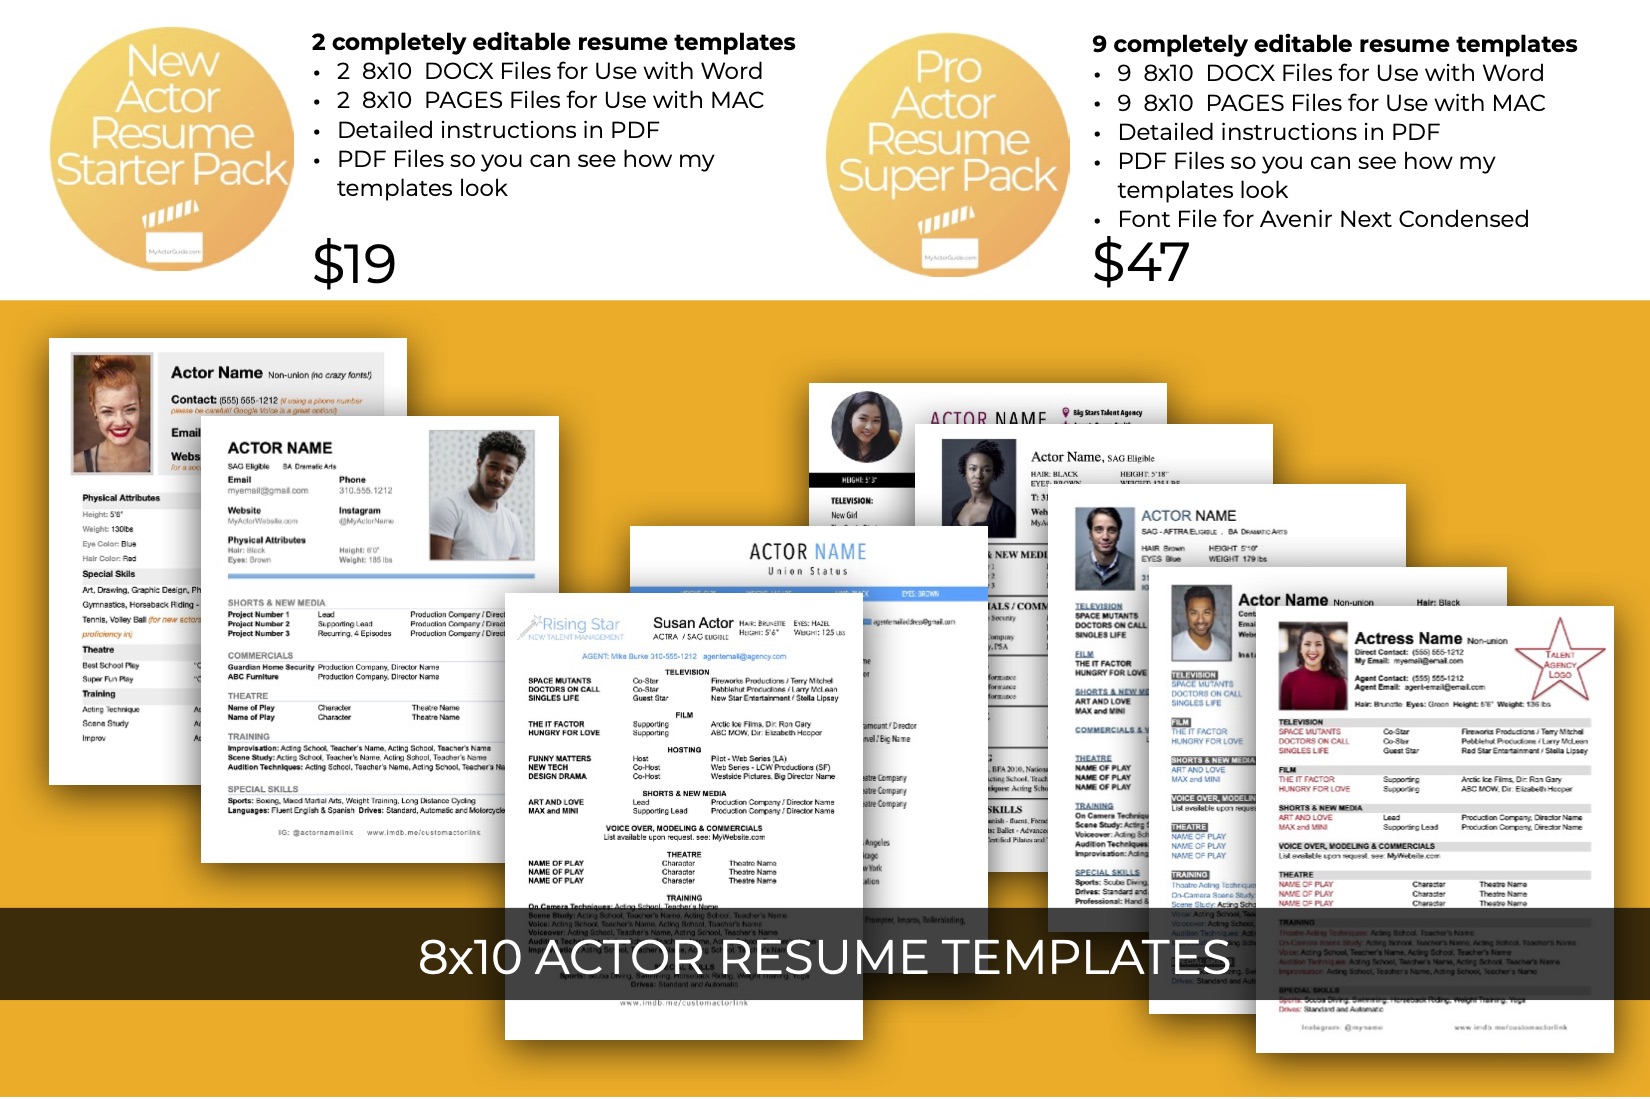 Actor's Resume Templates: Get a professionalisms actor's resume in minutes!